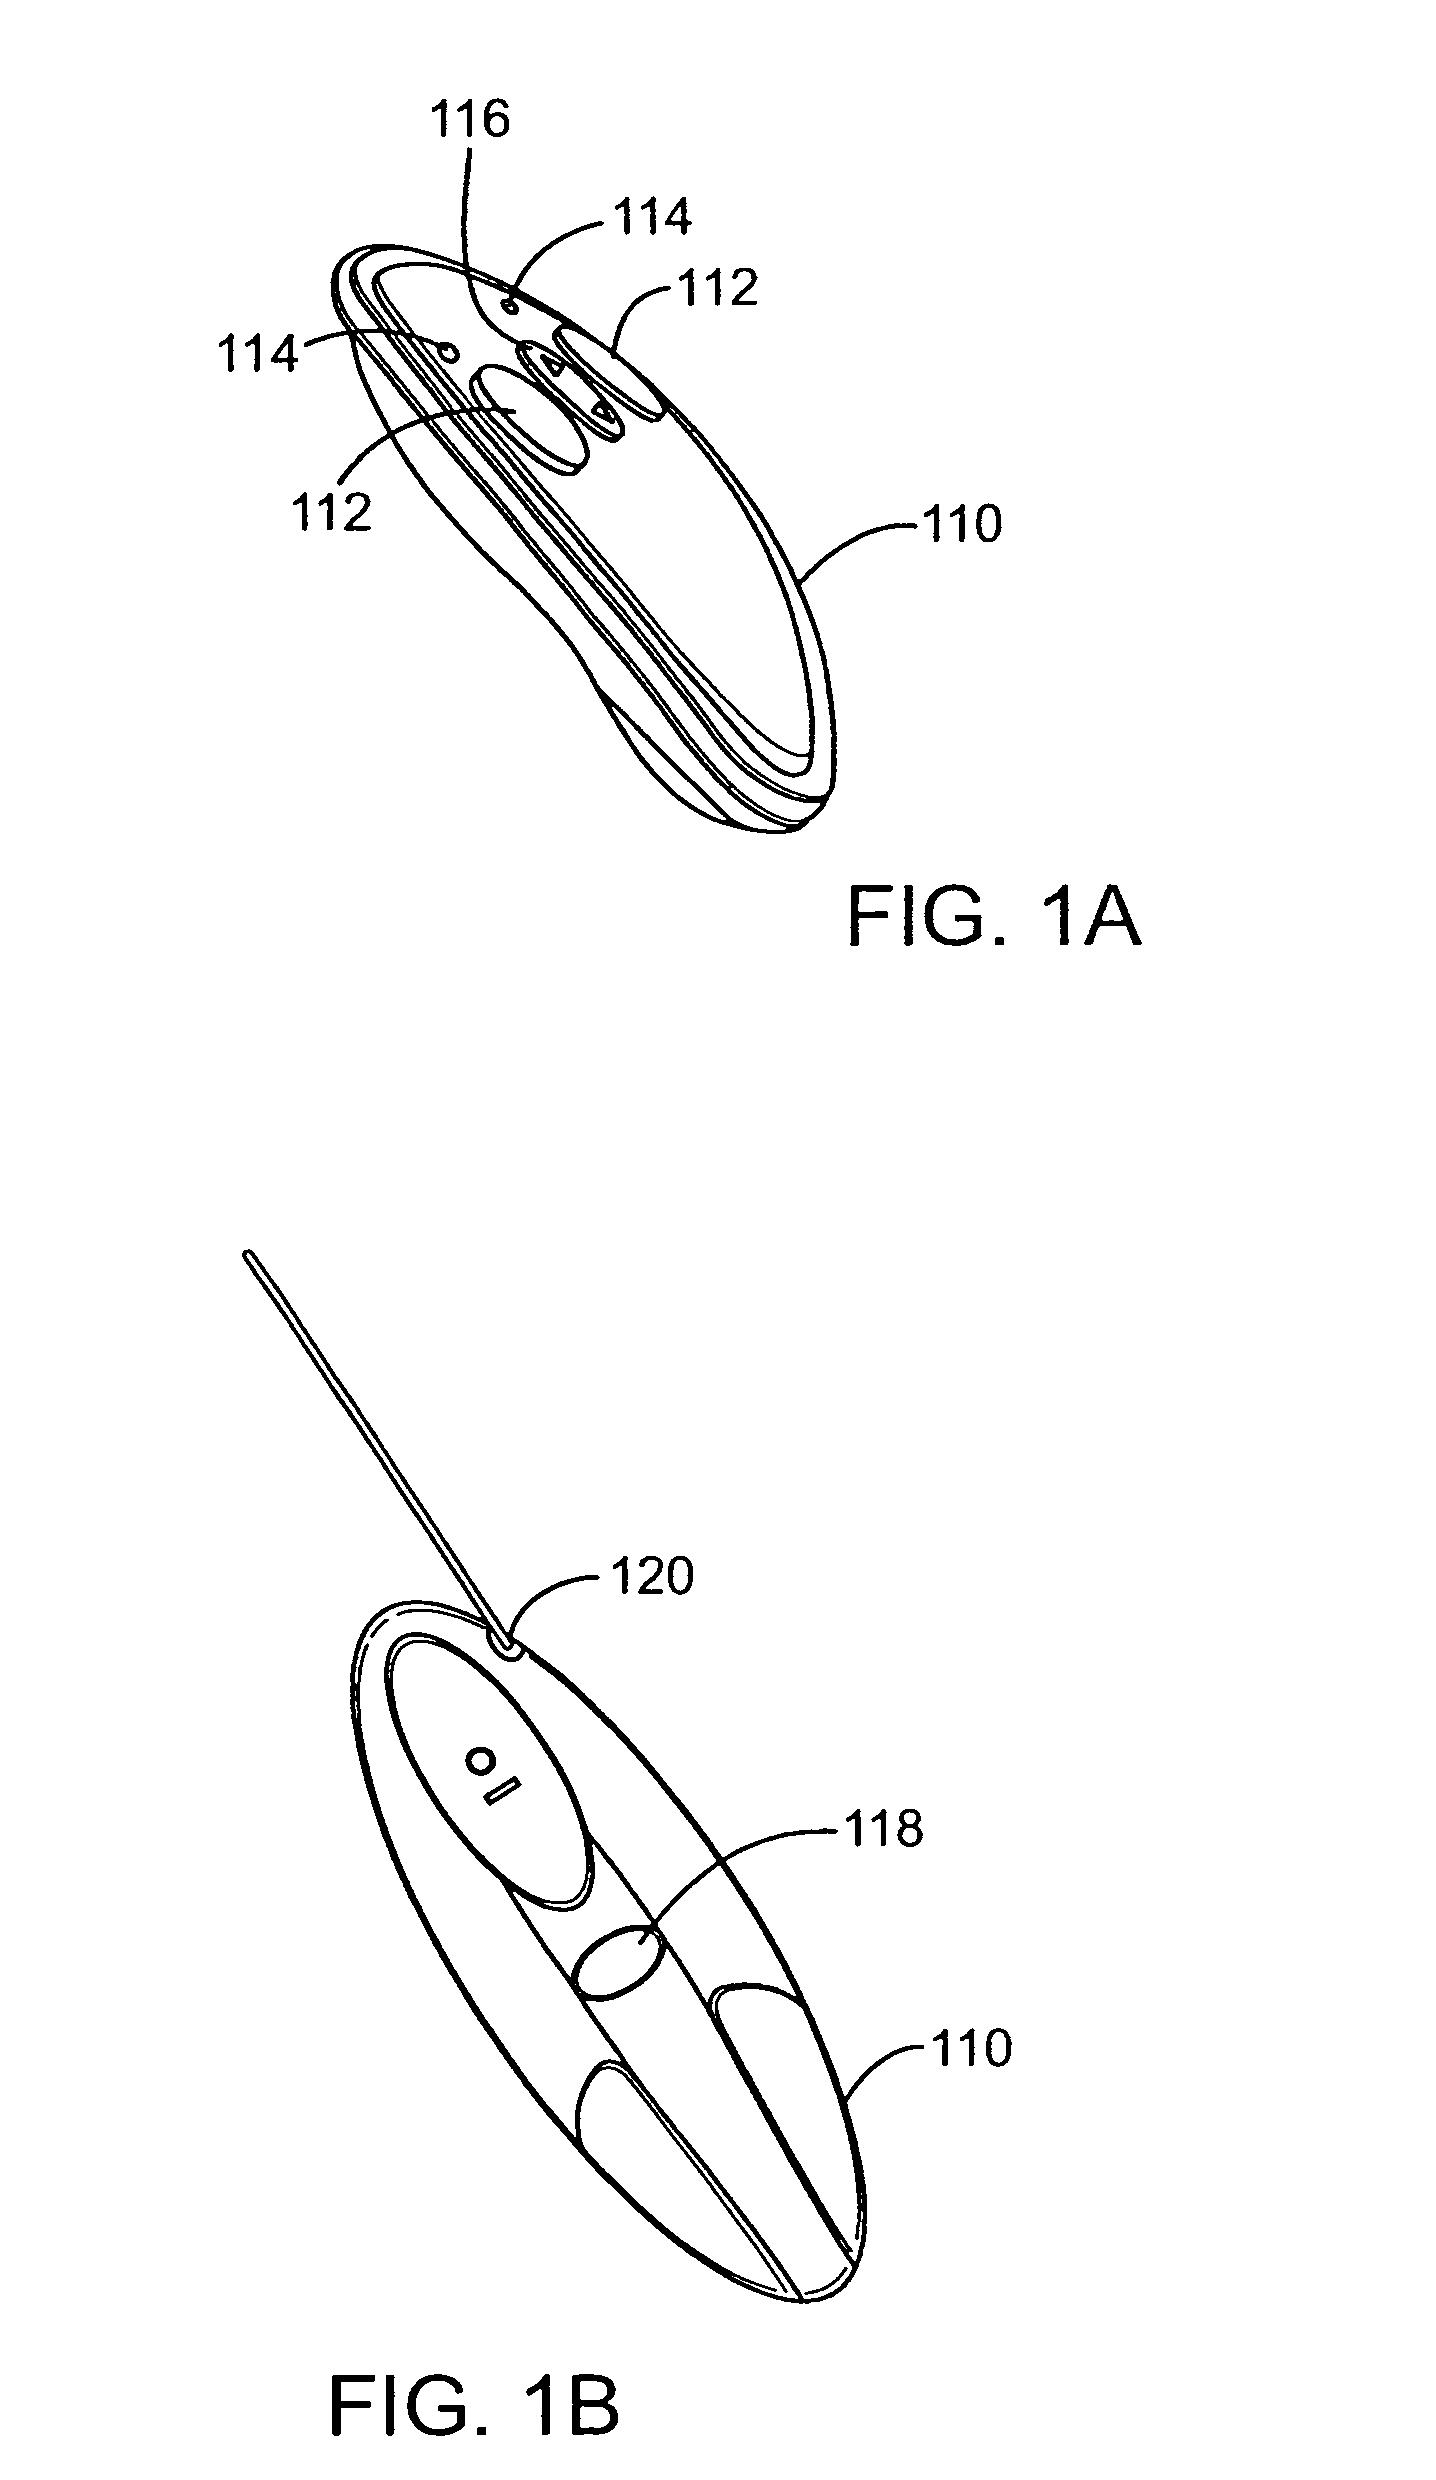 Hybrid presentation controller and computer input device